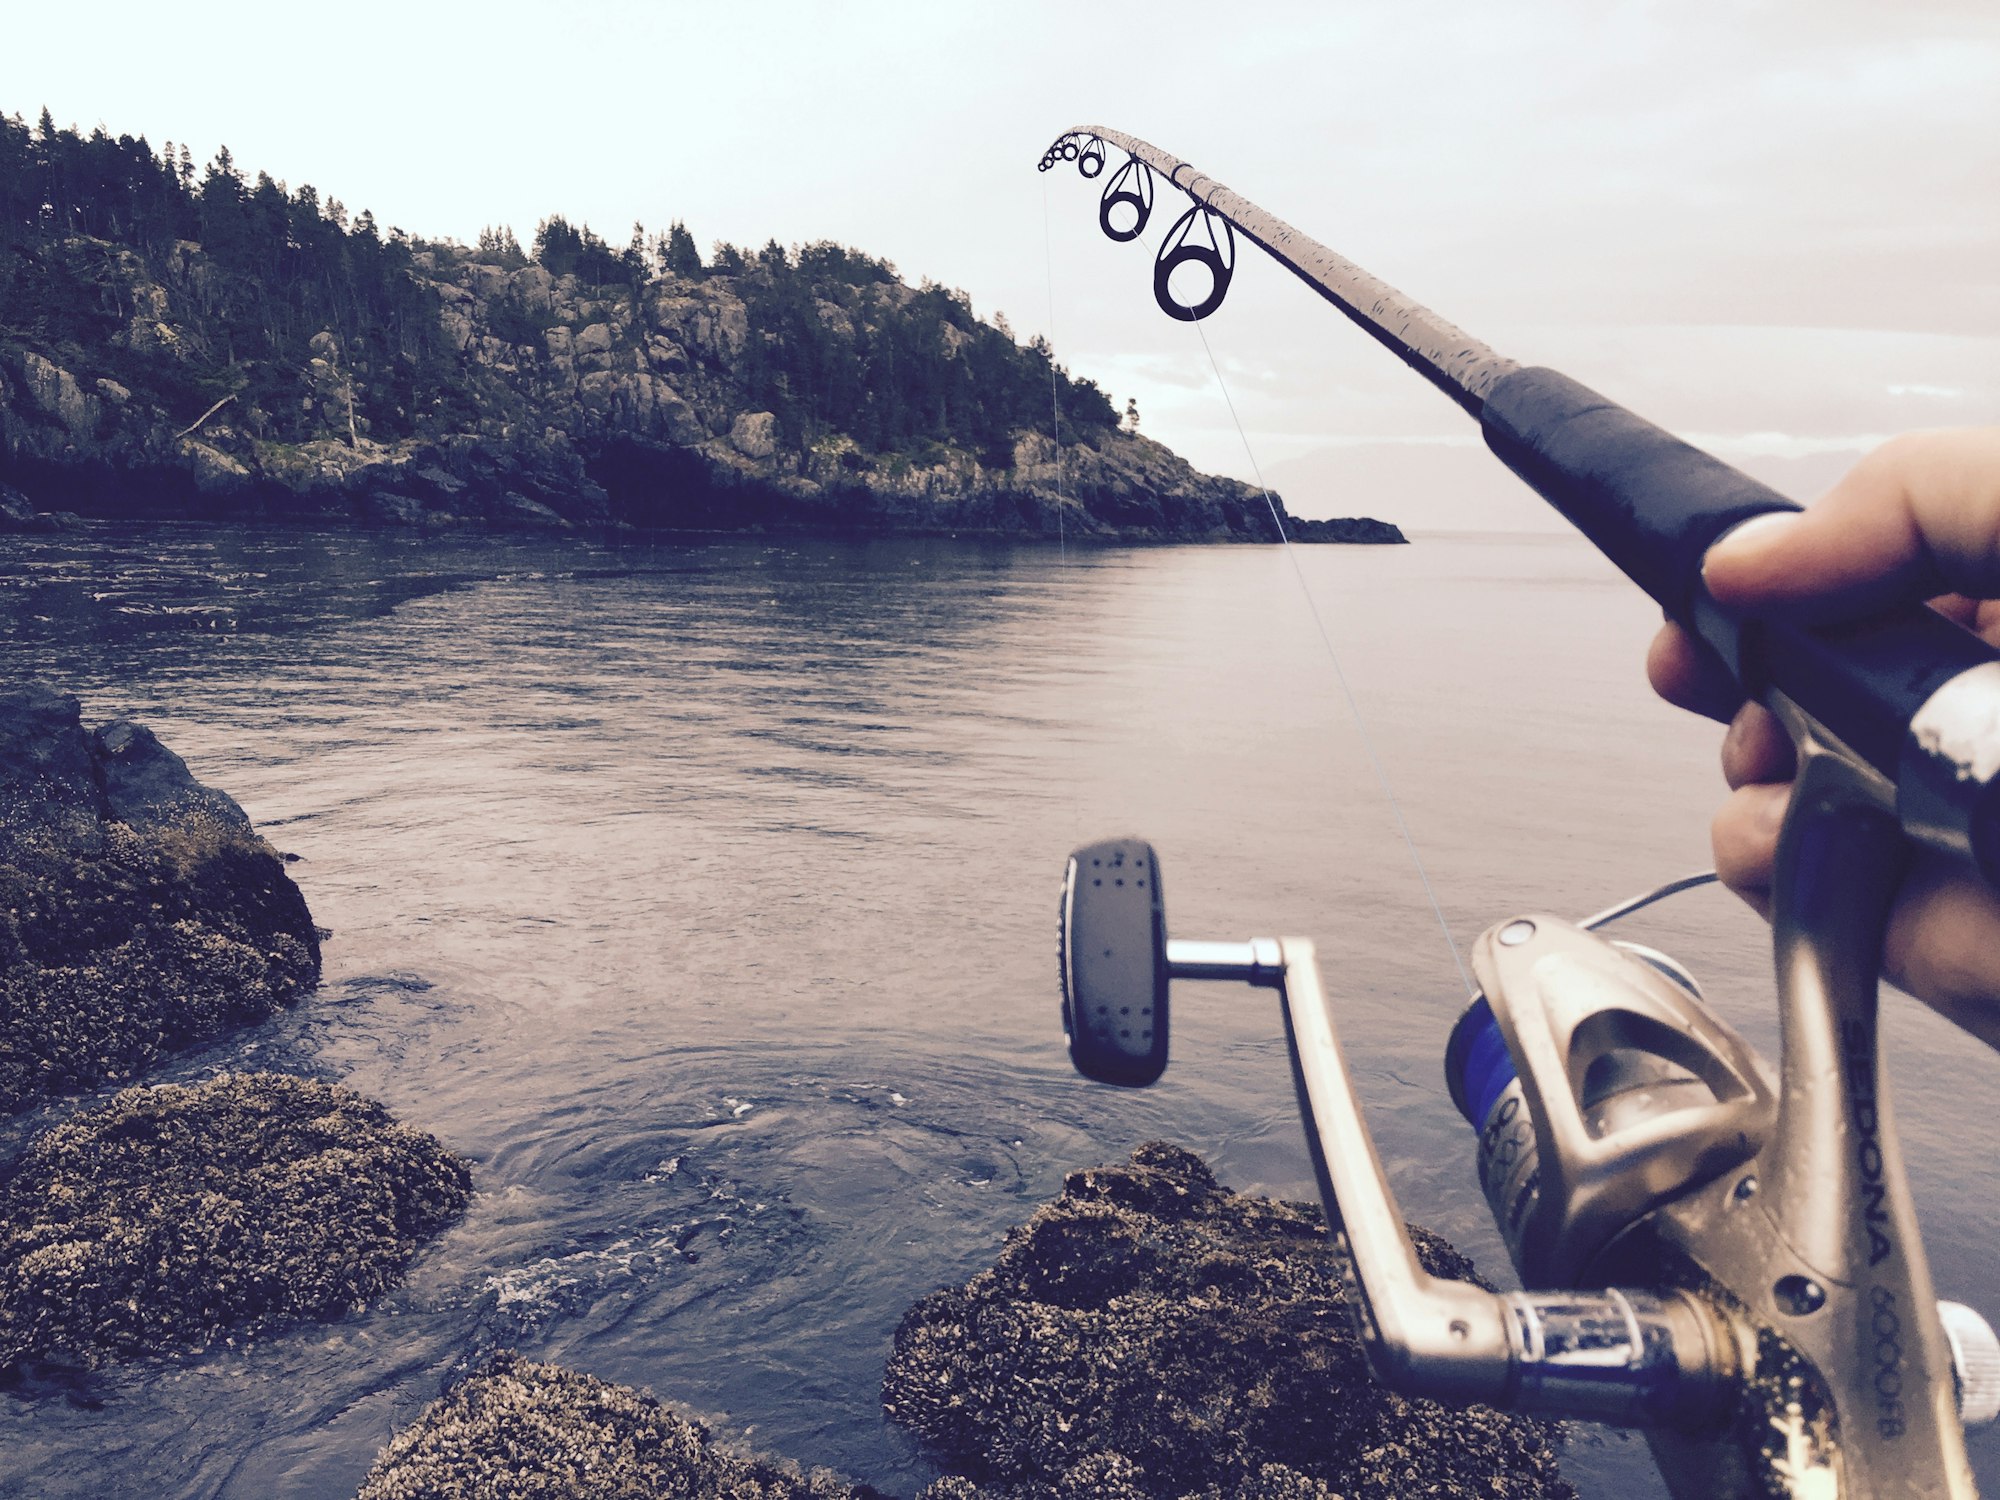 Want To Catch More Fish? Find The Best Telescopic Fishing Rods In 2022 Right Here!